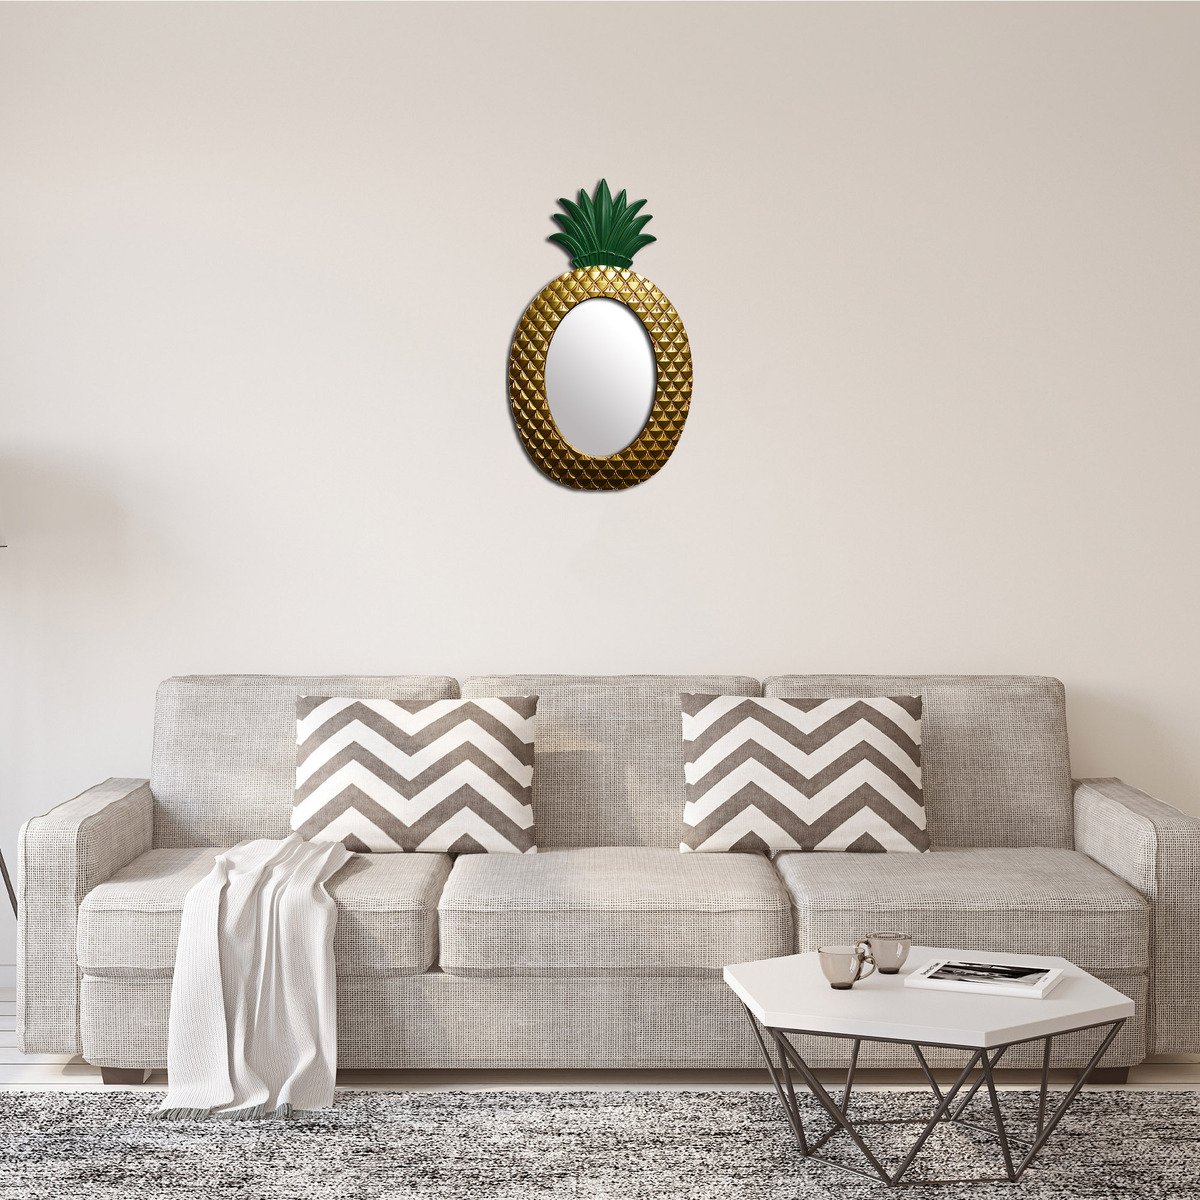 Maple Leaf Wall Decor Mirror Pineapple 57x33.5x2.5cm KD-721618C Assorted Color